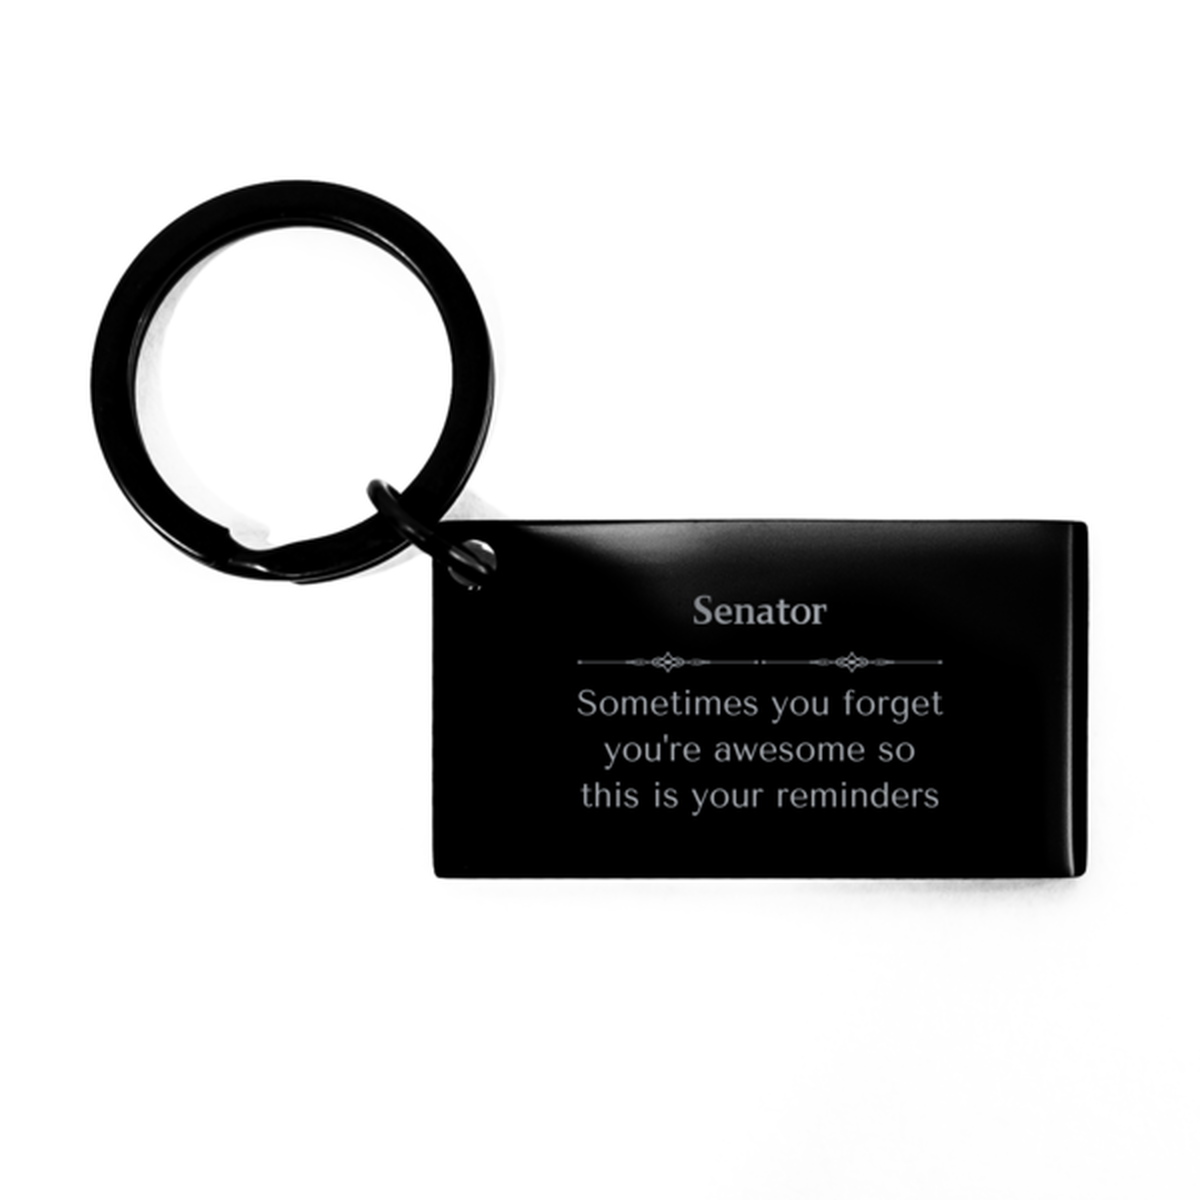 Sentimental Senator Keychain, Valet Sometimes you forget you're awesome so this is your reminders, Graduation Christmas Birthday Gifts for Senator, Men, Women, Coworkers